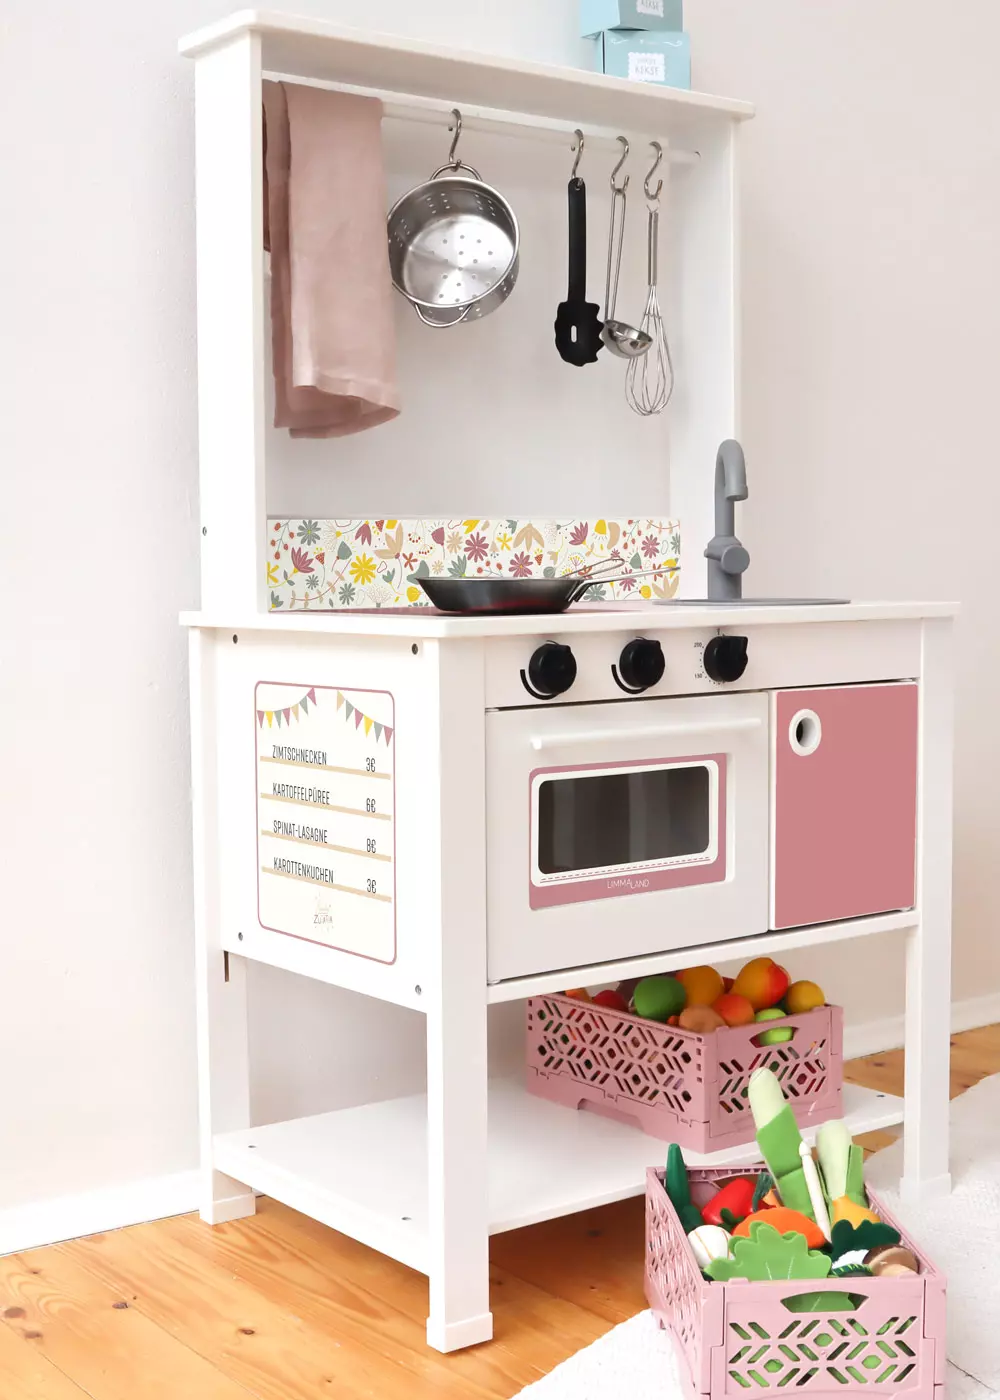 Decal for IKEA SPISIG play kitchen with floral pattern